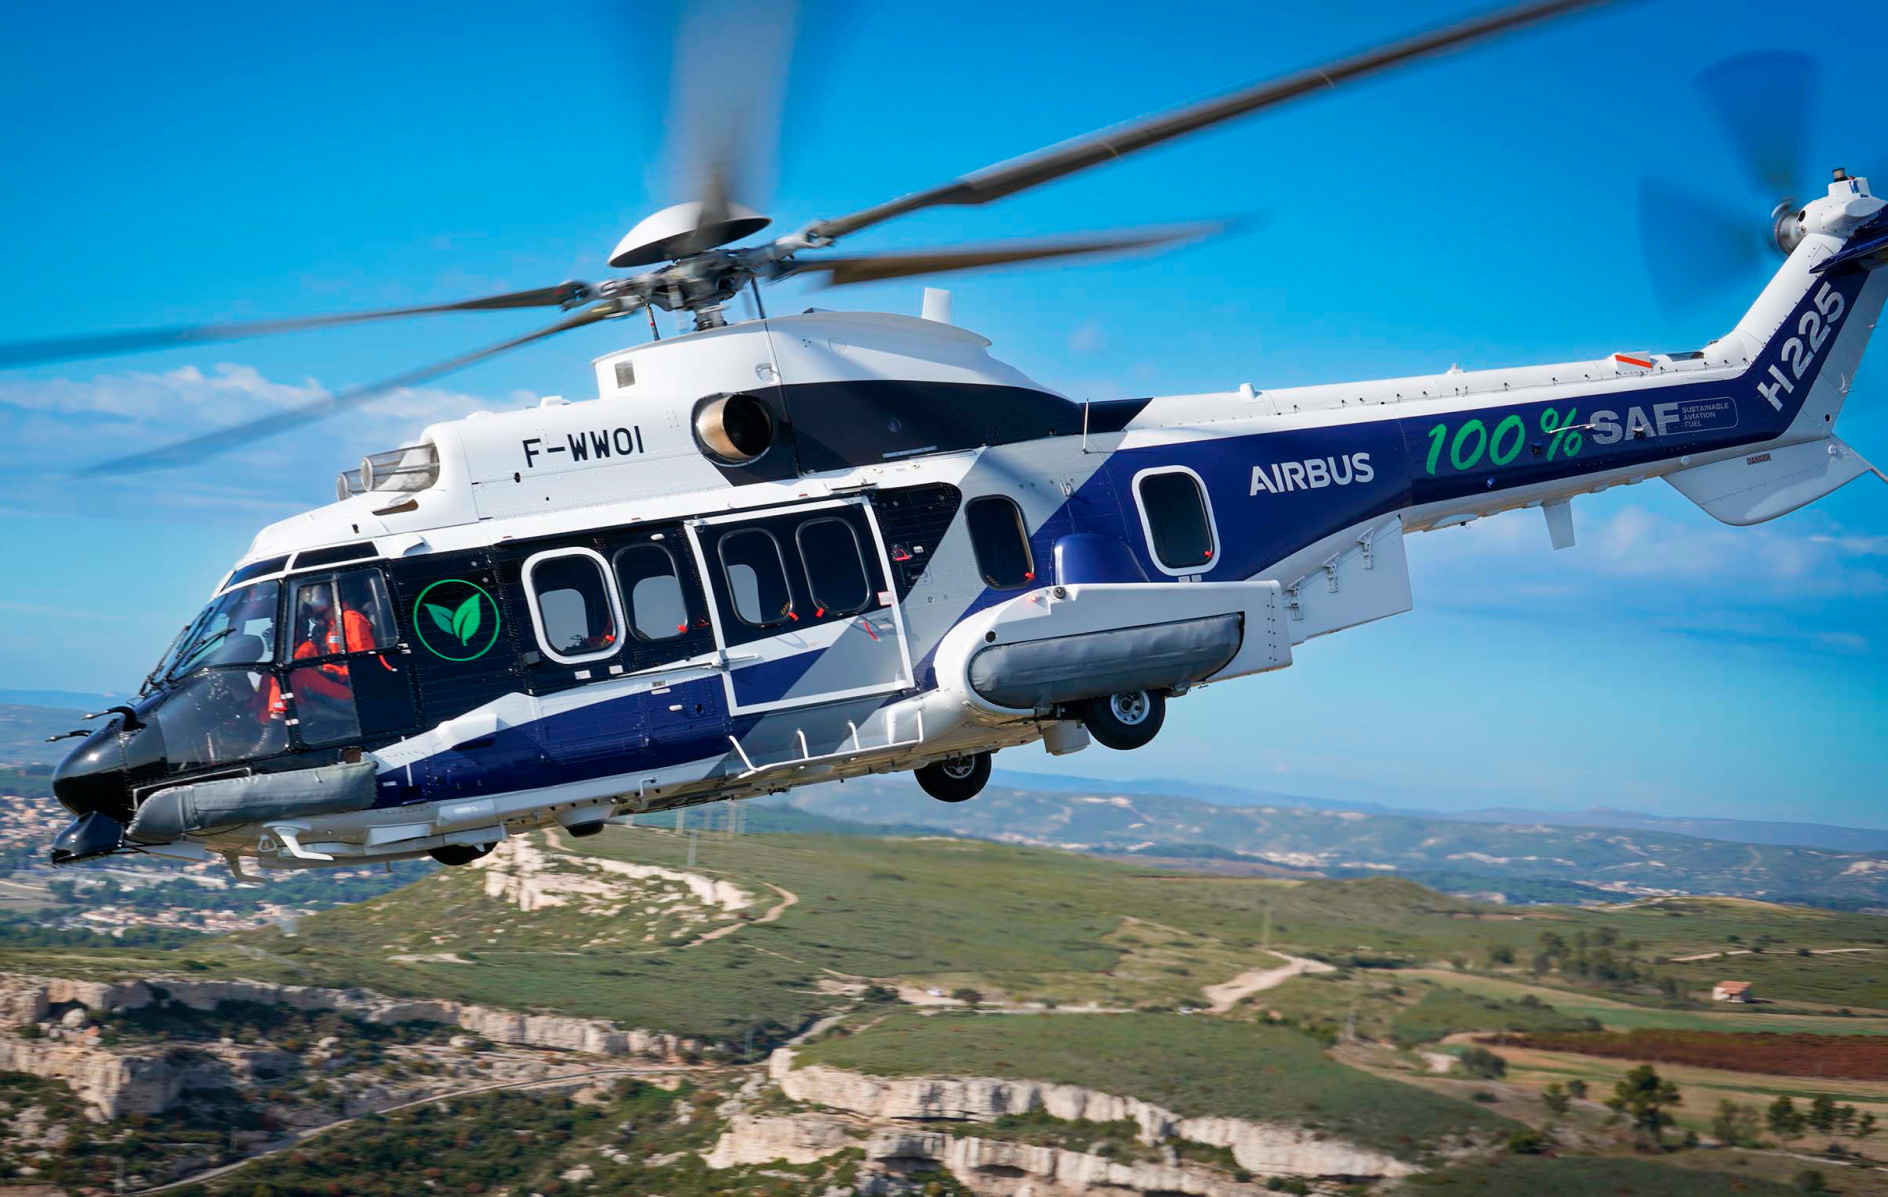 Airbus H225 performing a flight with 100% sustainable aviation fuel (SAF) powering one of the Safran Makila 2 engines. Click to enlarge.